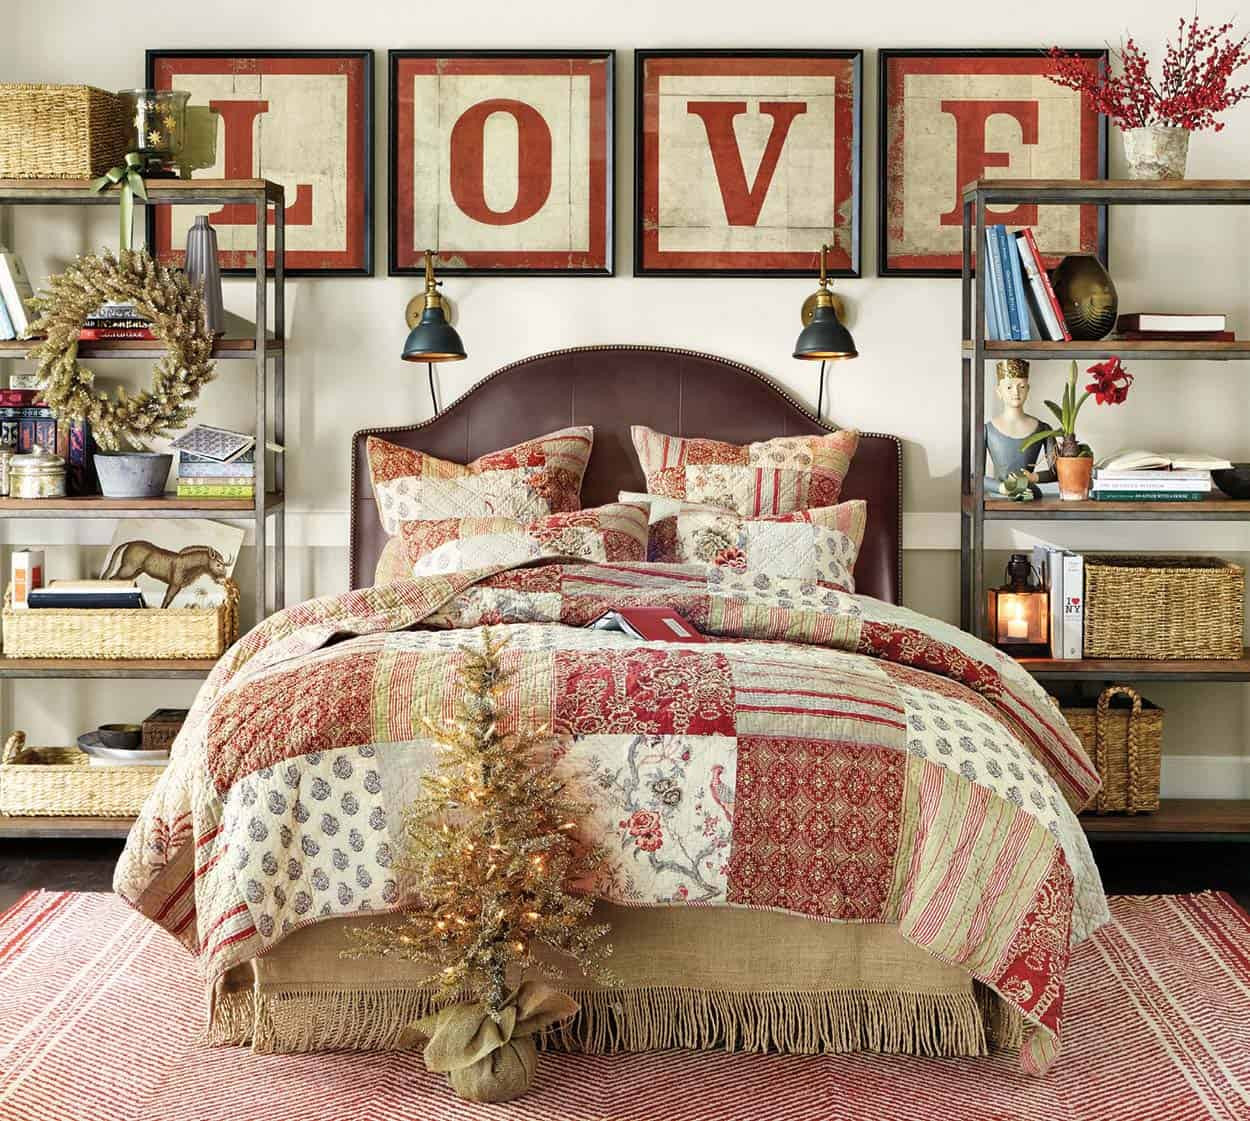 Christmas Decorations Bedroom
 35 Ways to create a Christmas wonderland in your bedroom